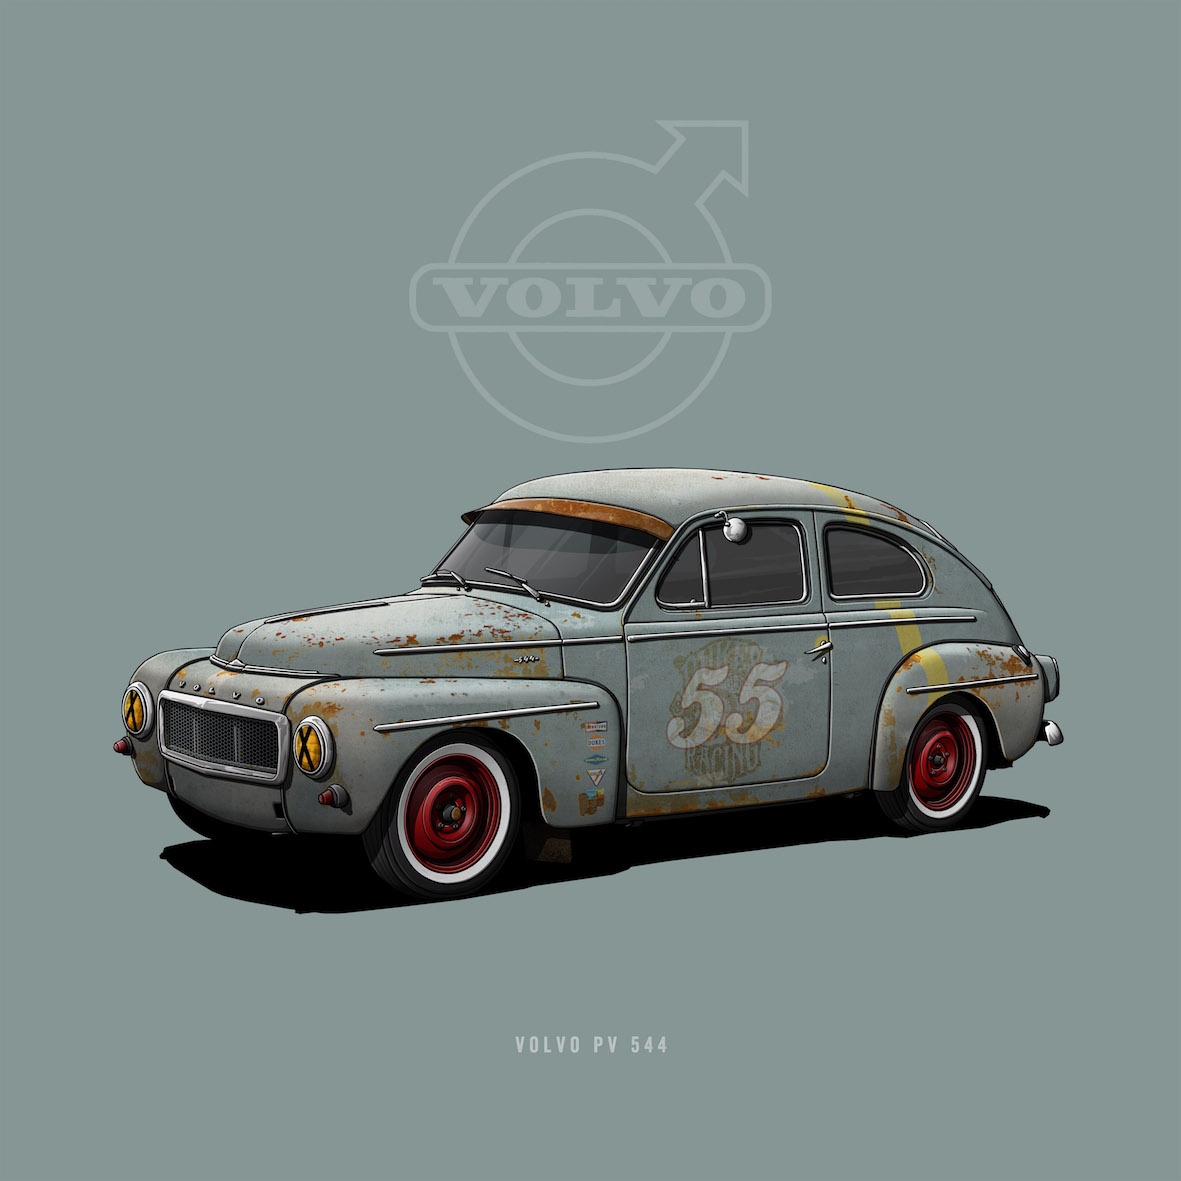 Volvo Pv544 Wallpapers